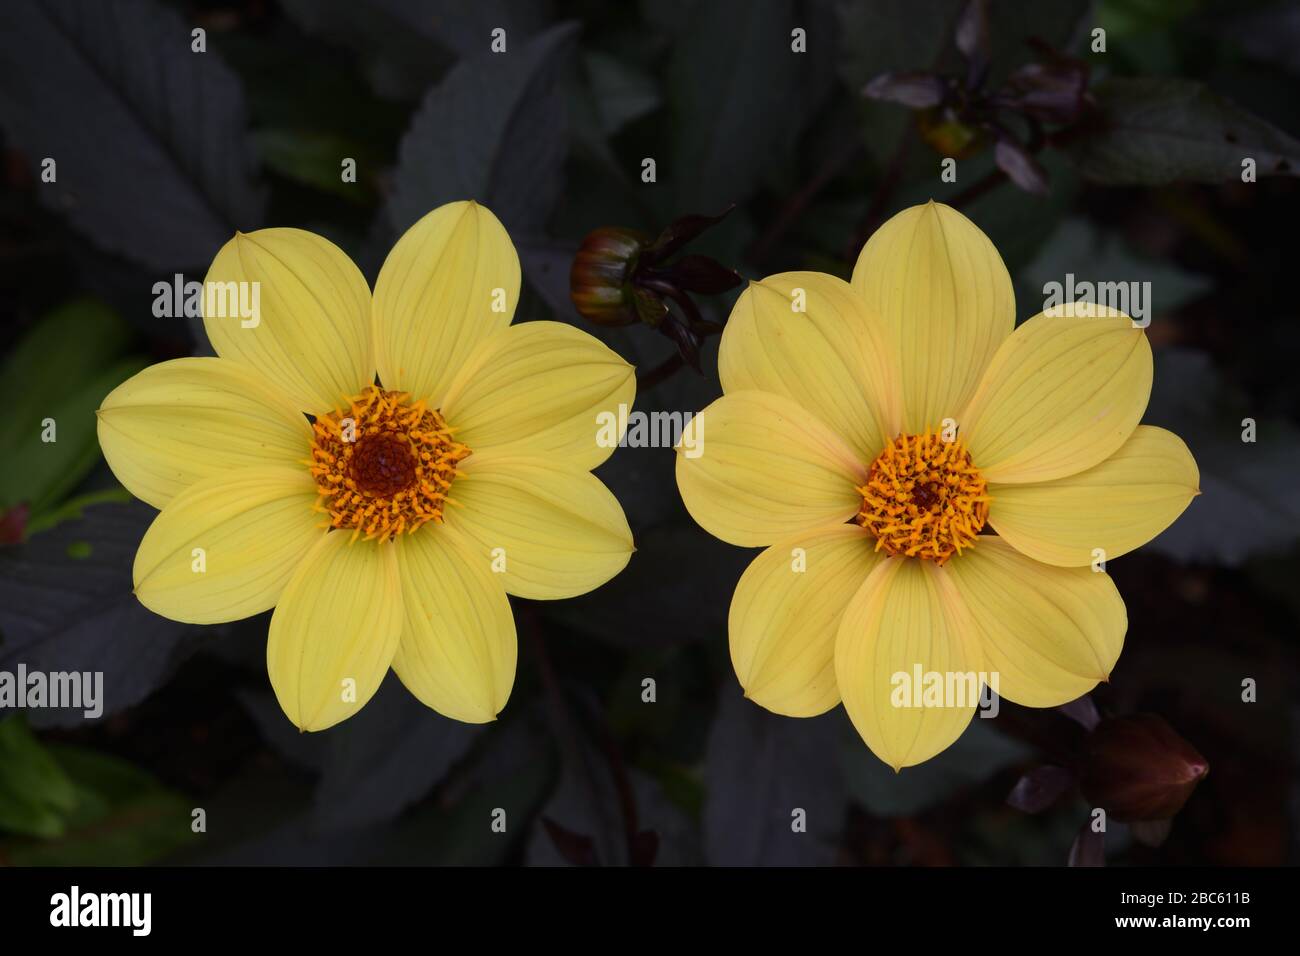 Dahlia. Name. Bishop of York. Close up of two bronze daisy like flowers with yellow centres. Stock Photo